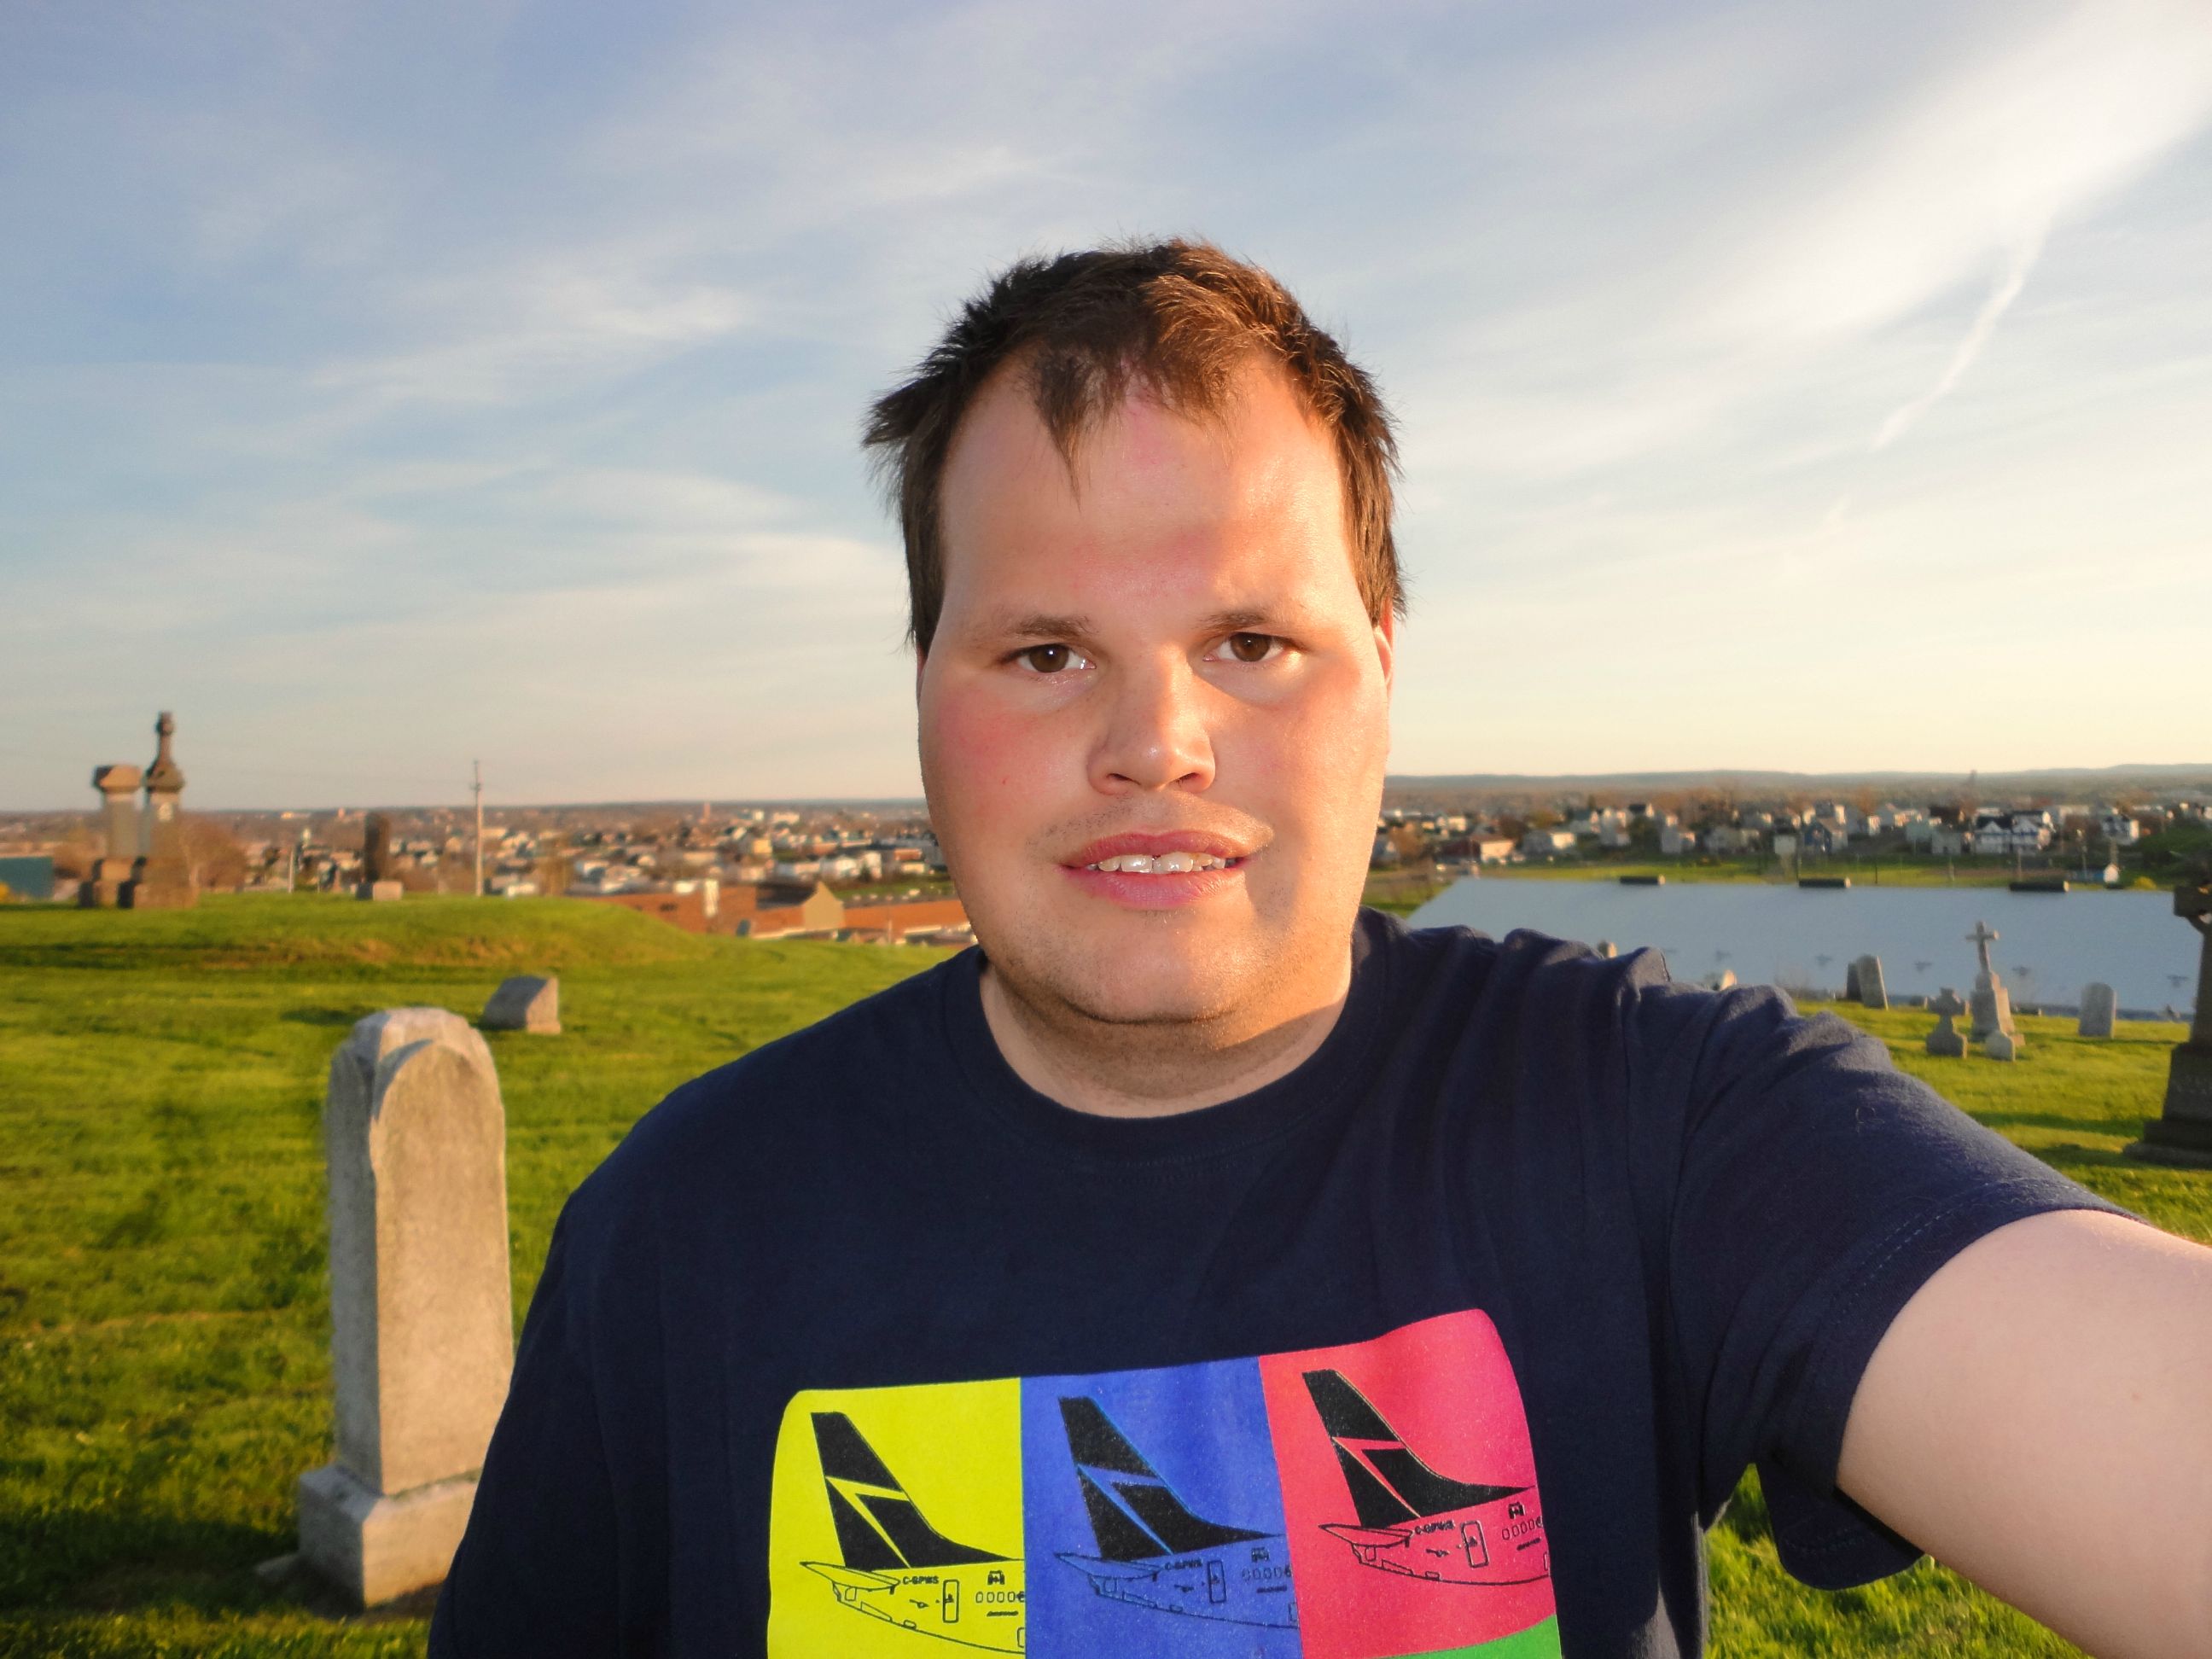 Here is Frankie MacDonald enjoying the Nice and Warm Evening down in Whitney Pier Area.